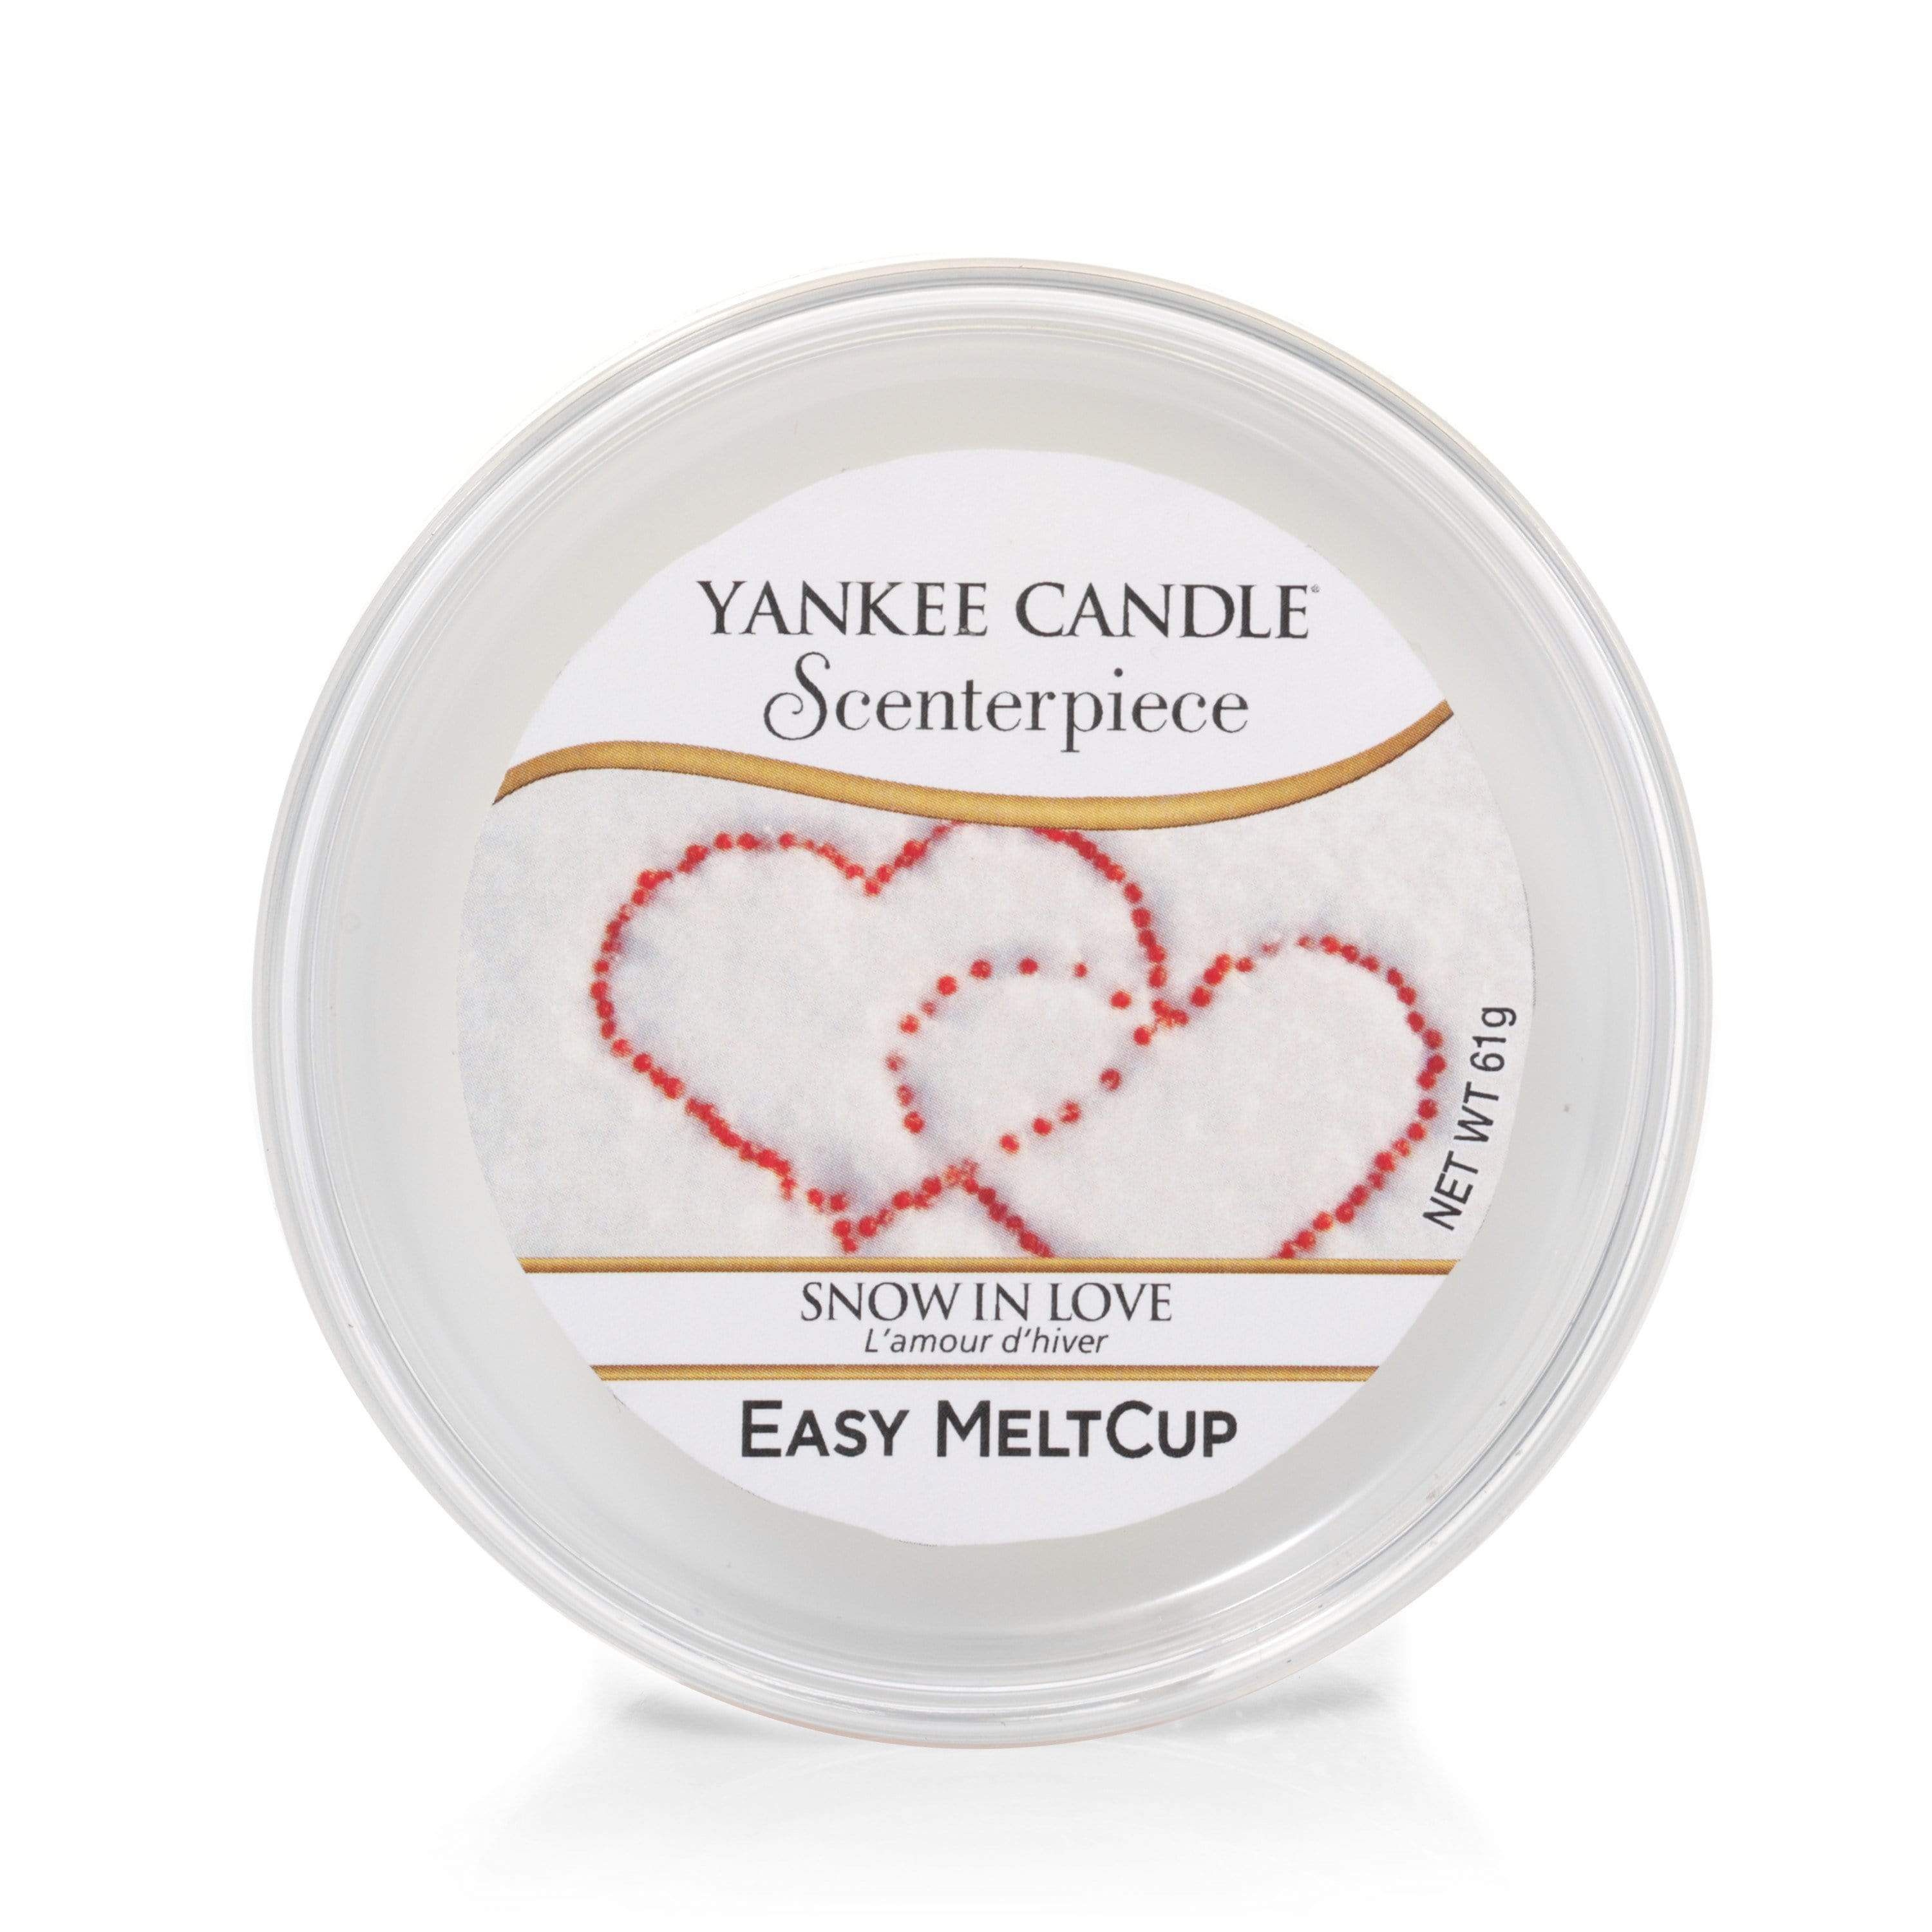 Yankee Candle Melt Cup Yankee Candle Scenterpiece Melt Cup - Snow in Love